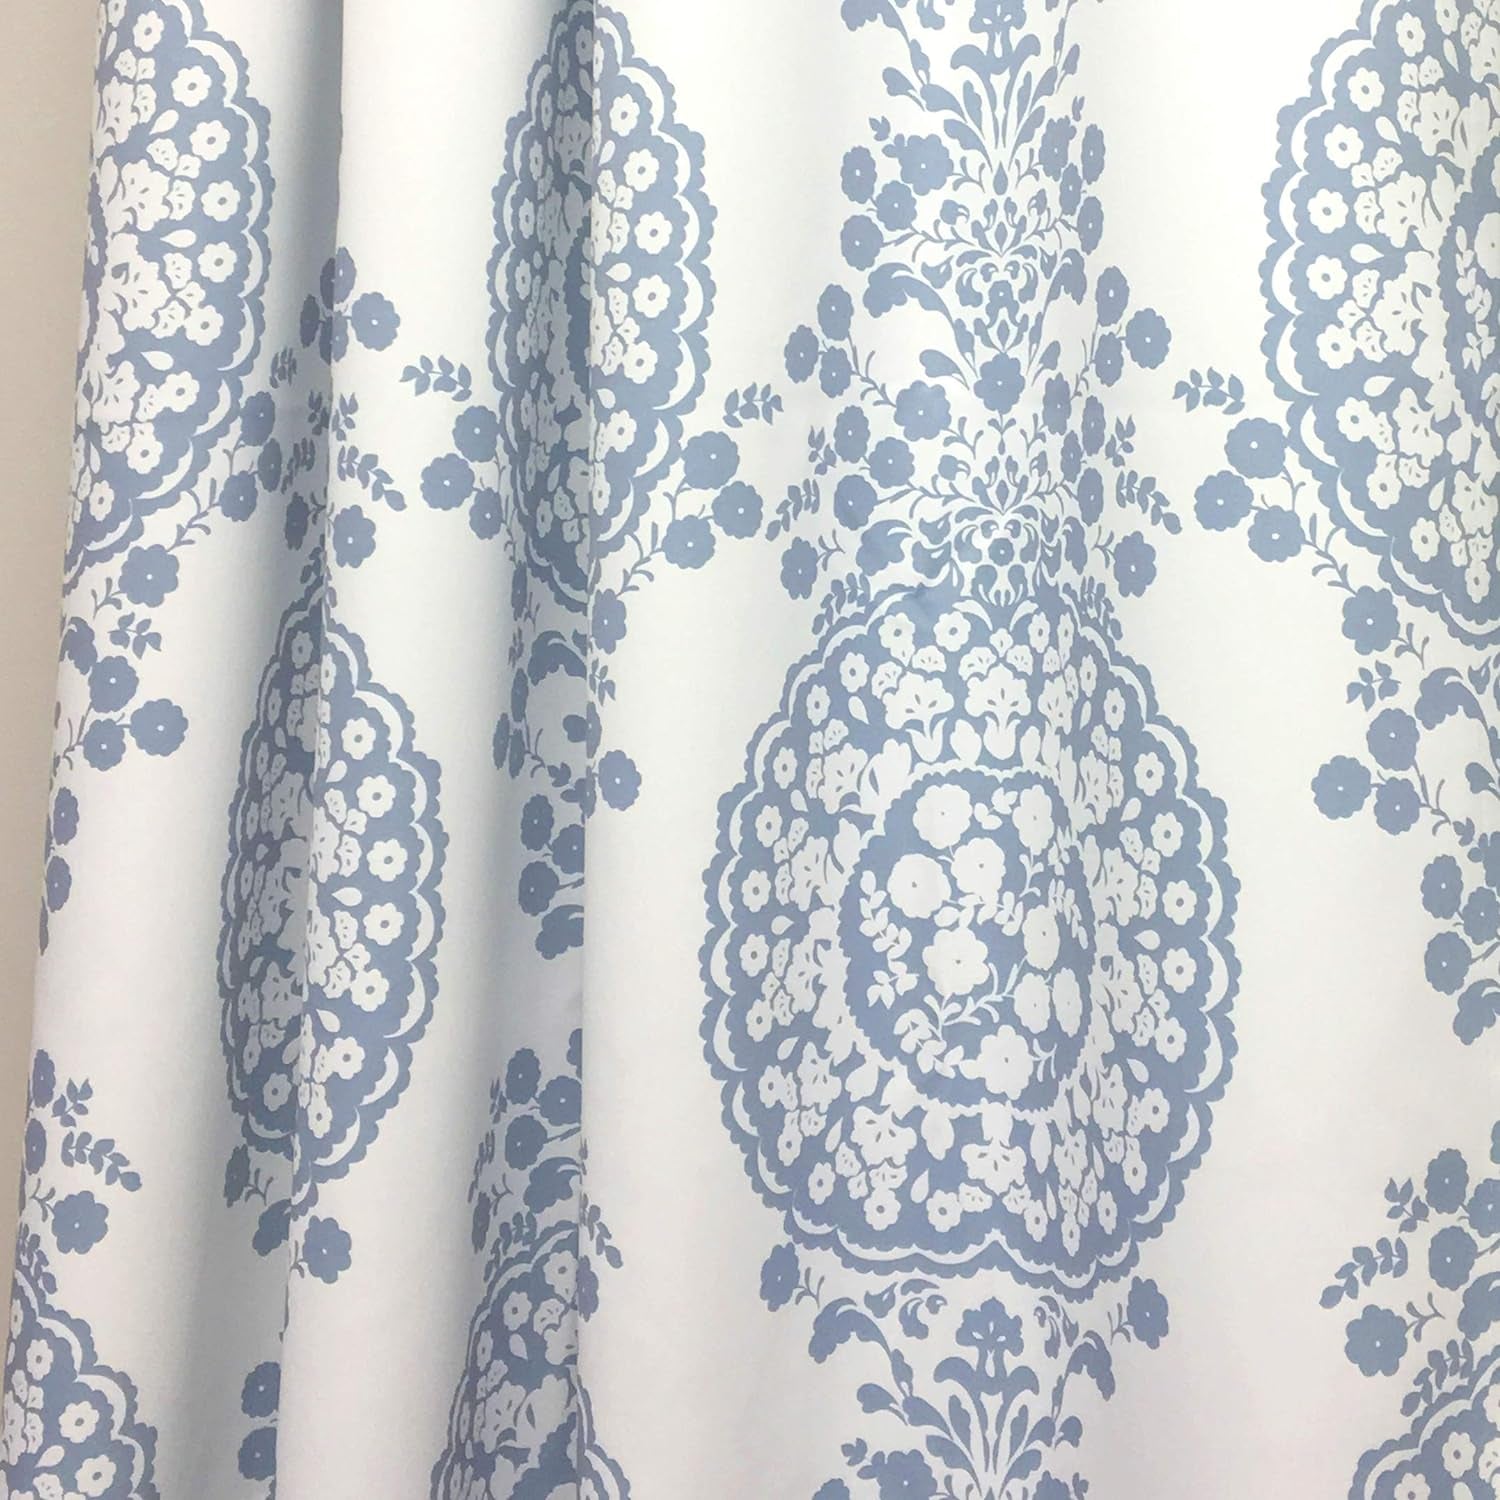 Driftaway Damask Curtains for Kitchen Bathroom Laundry Room Small Windows Floral Damask Medallion Patterned Adjustable Tie up Curtain Single 45 Inch by 63 Inch Dusty Blue  DriftAway   